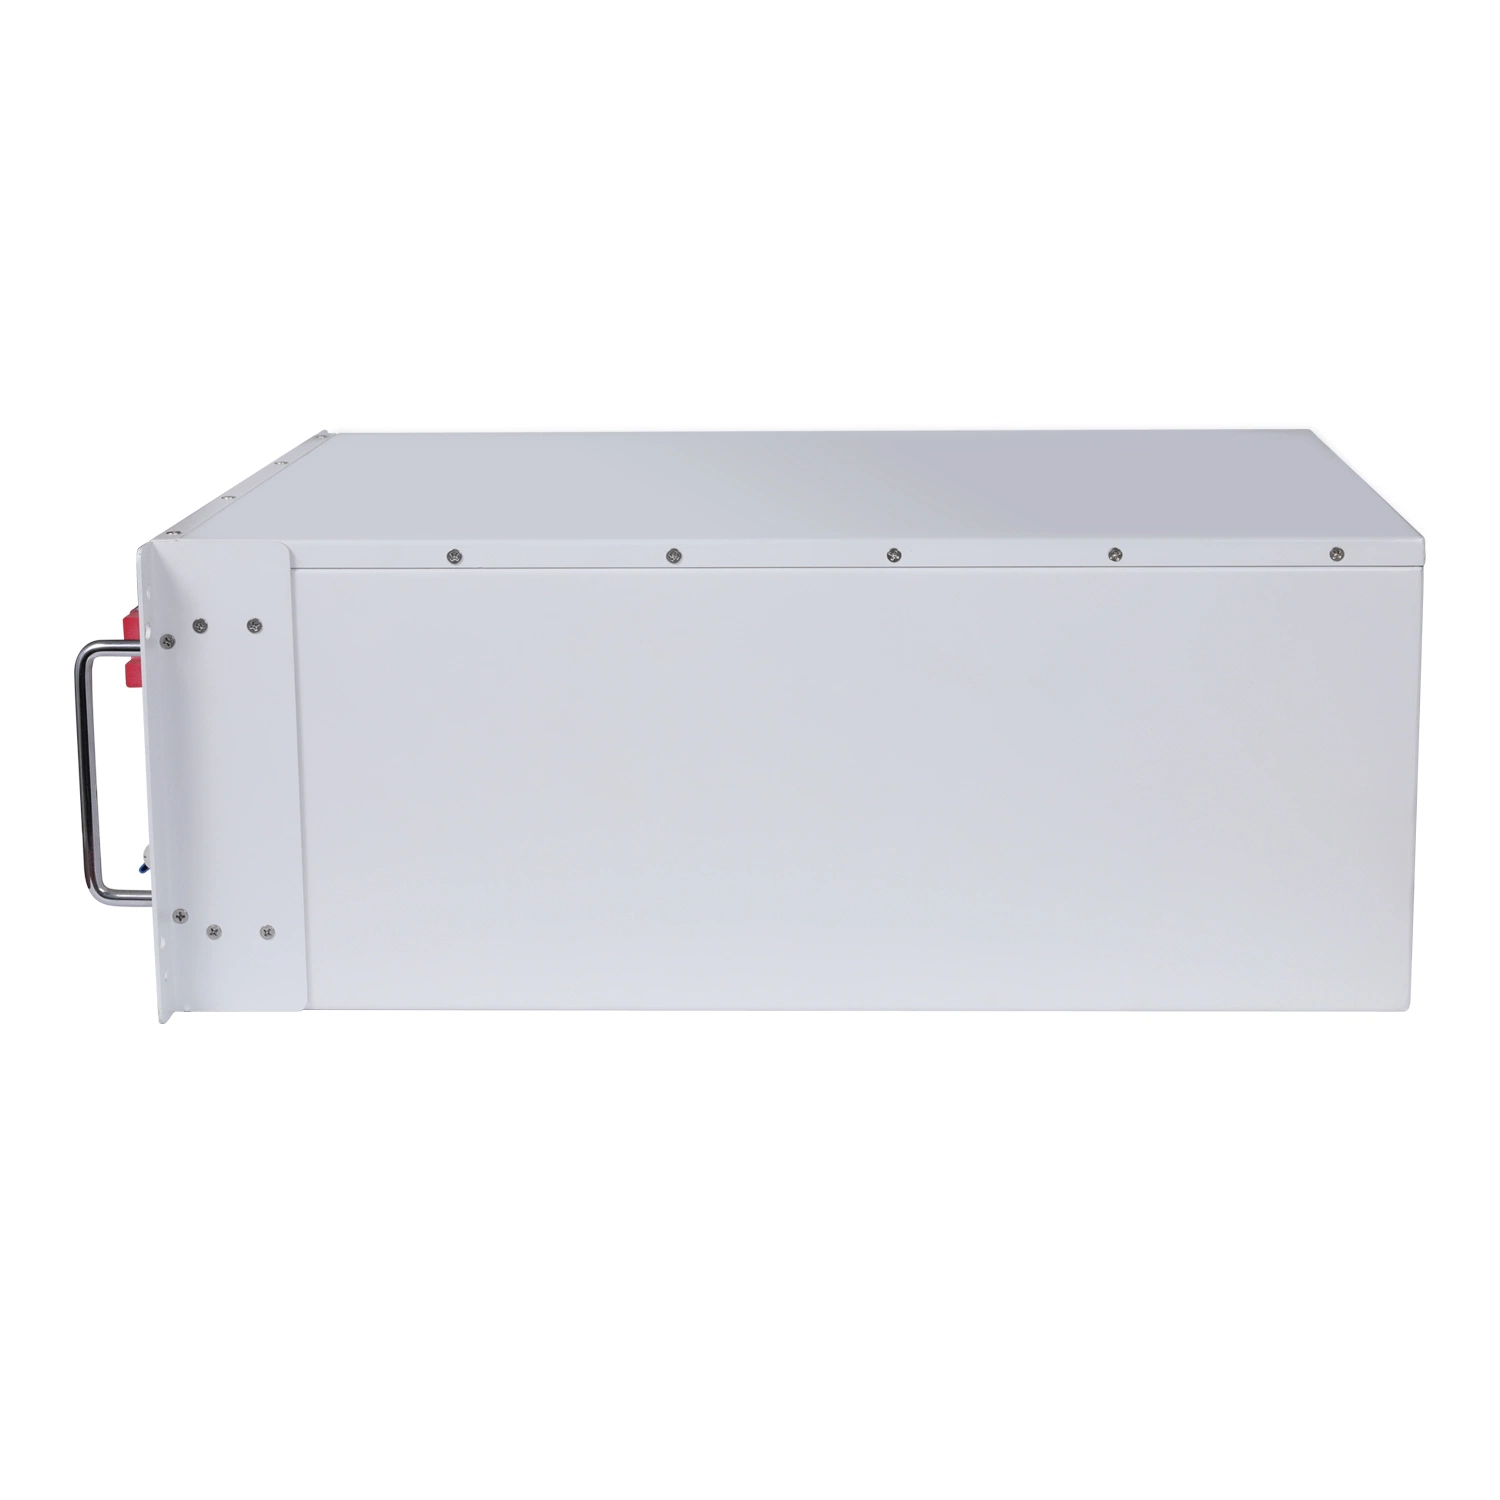 51.2V 200ah Deep Cycle Lithium Iron Phosphate Battery Rack-Mounted Battery for Telecommunication for UPS